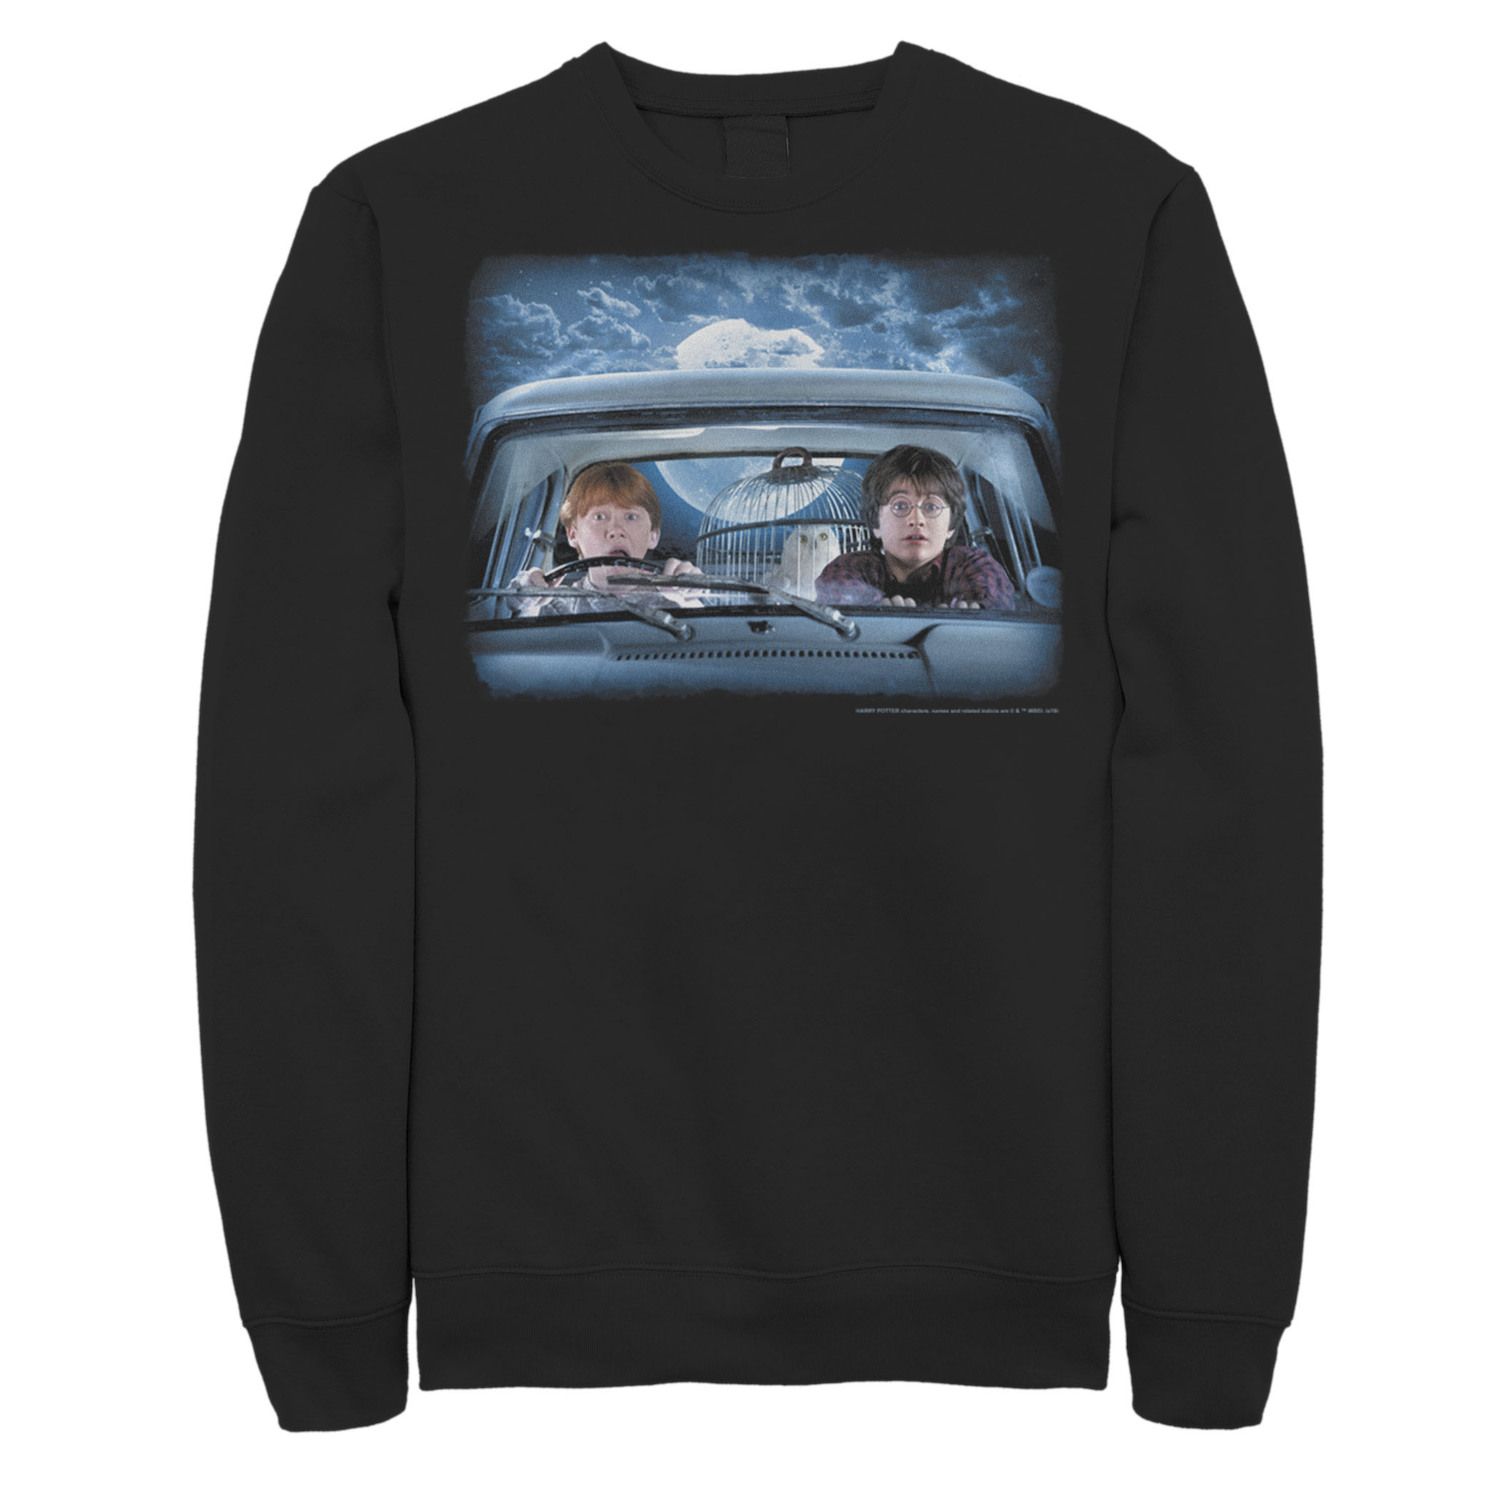 Image for Harry Potter Men's Ron & Harry In The Flying Car Sweatshirt at Kohl's.